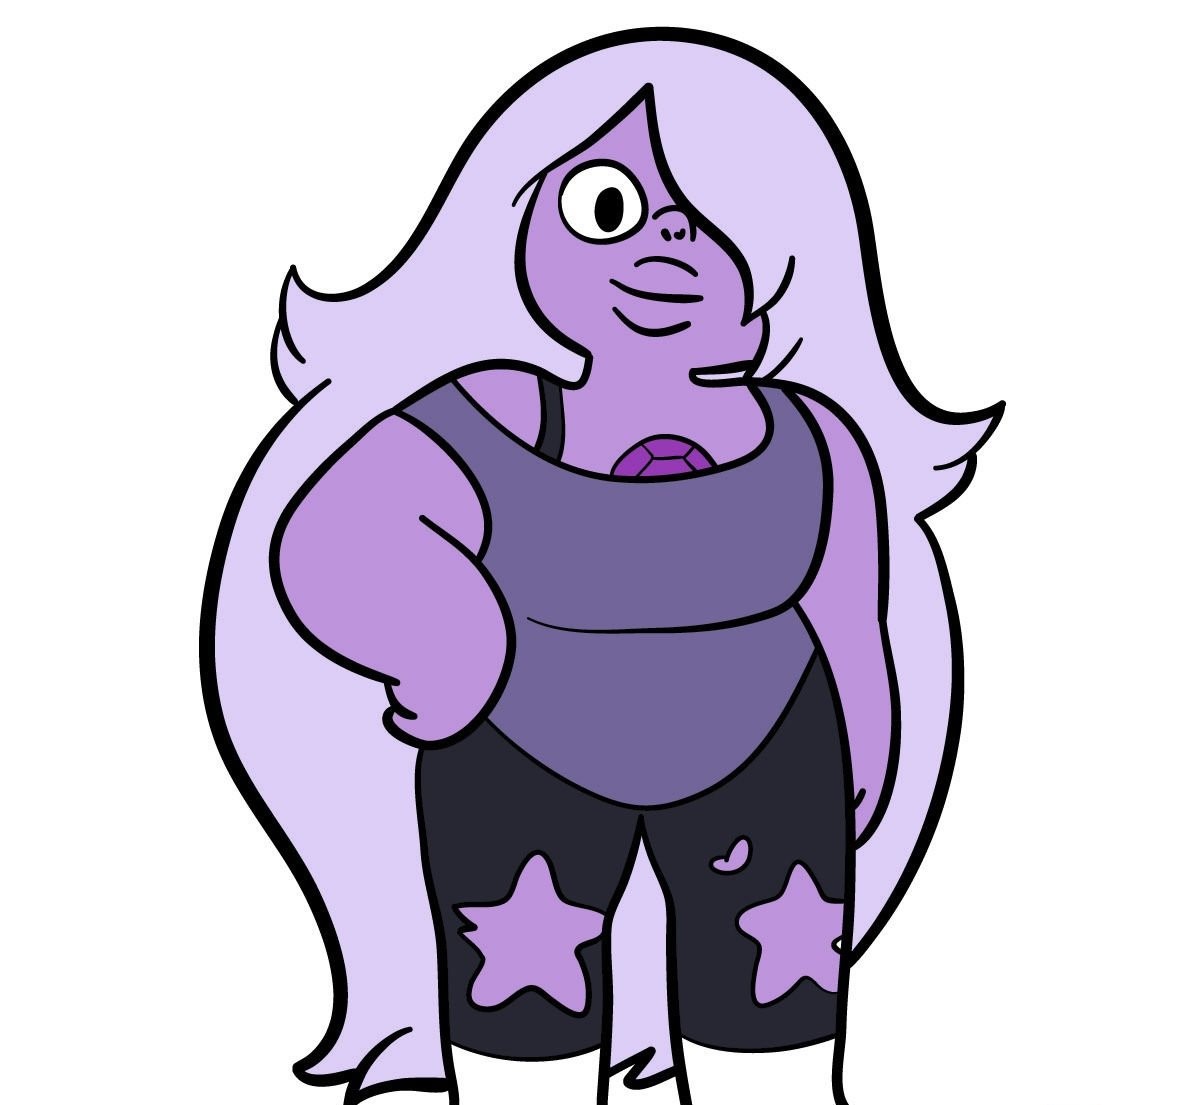 22-facts-about-amethyst-steven-universe